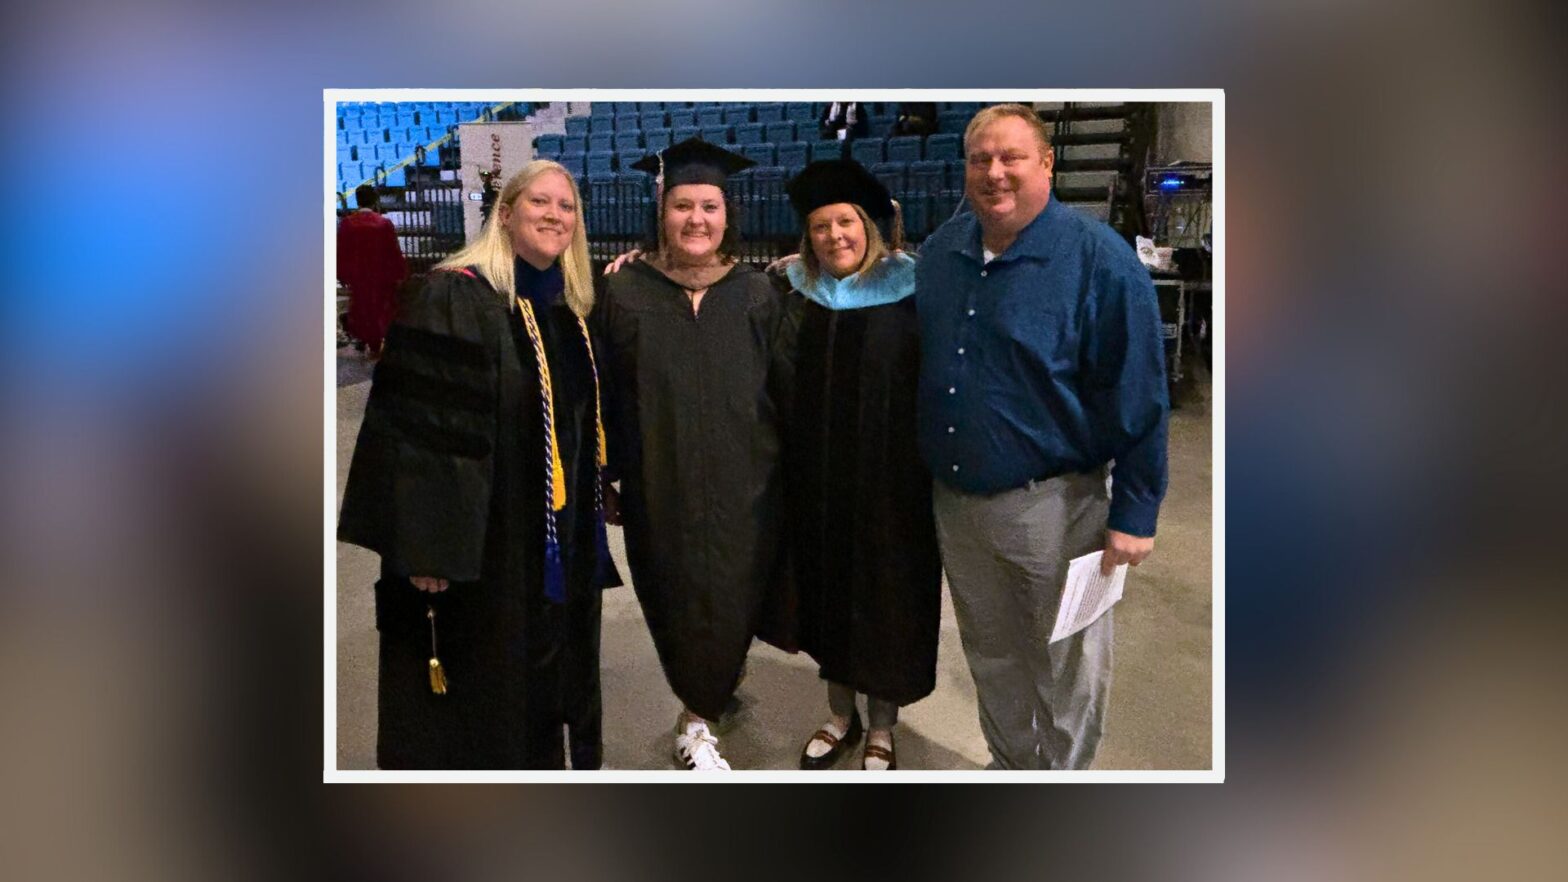 (From left to right) Jill Fort (Associate Vice President of Academic Affairs), Tiffany Webster (Outreach Student Success Coordinator), Jessica Bird (Dean of the School of Education and Social Work) and Alden Stout (Vice President of Academic Affairs).